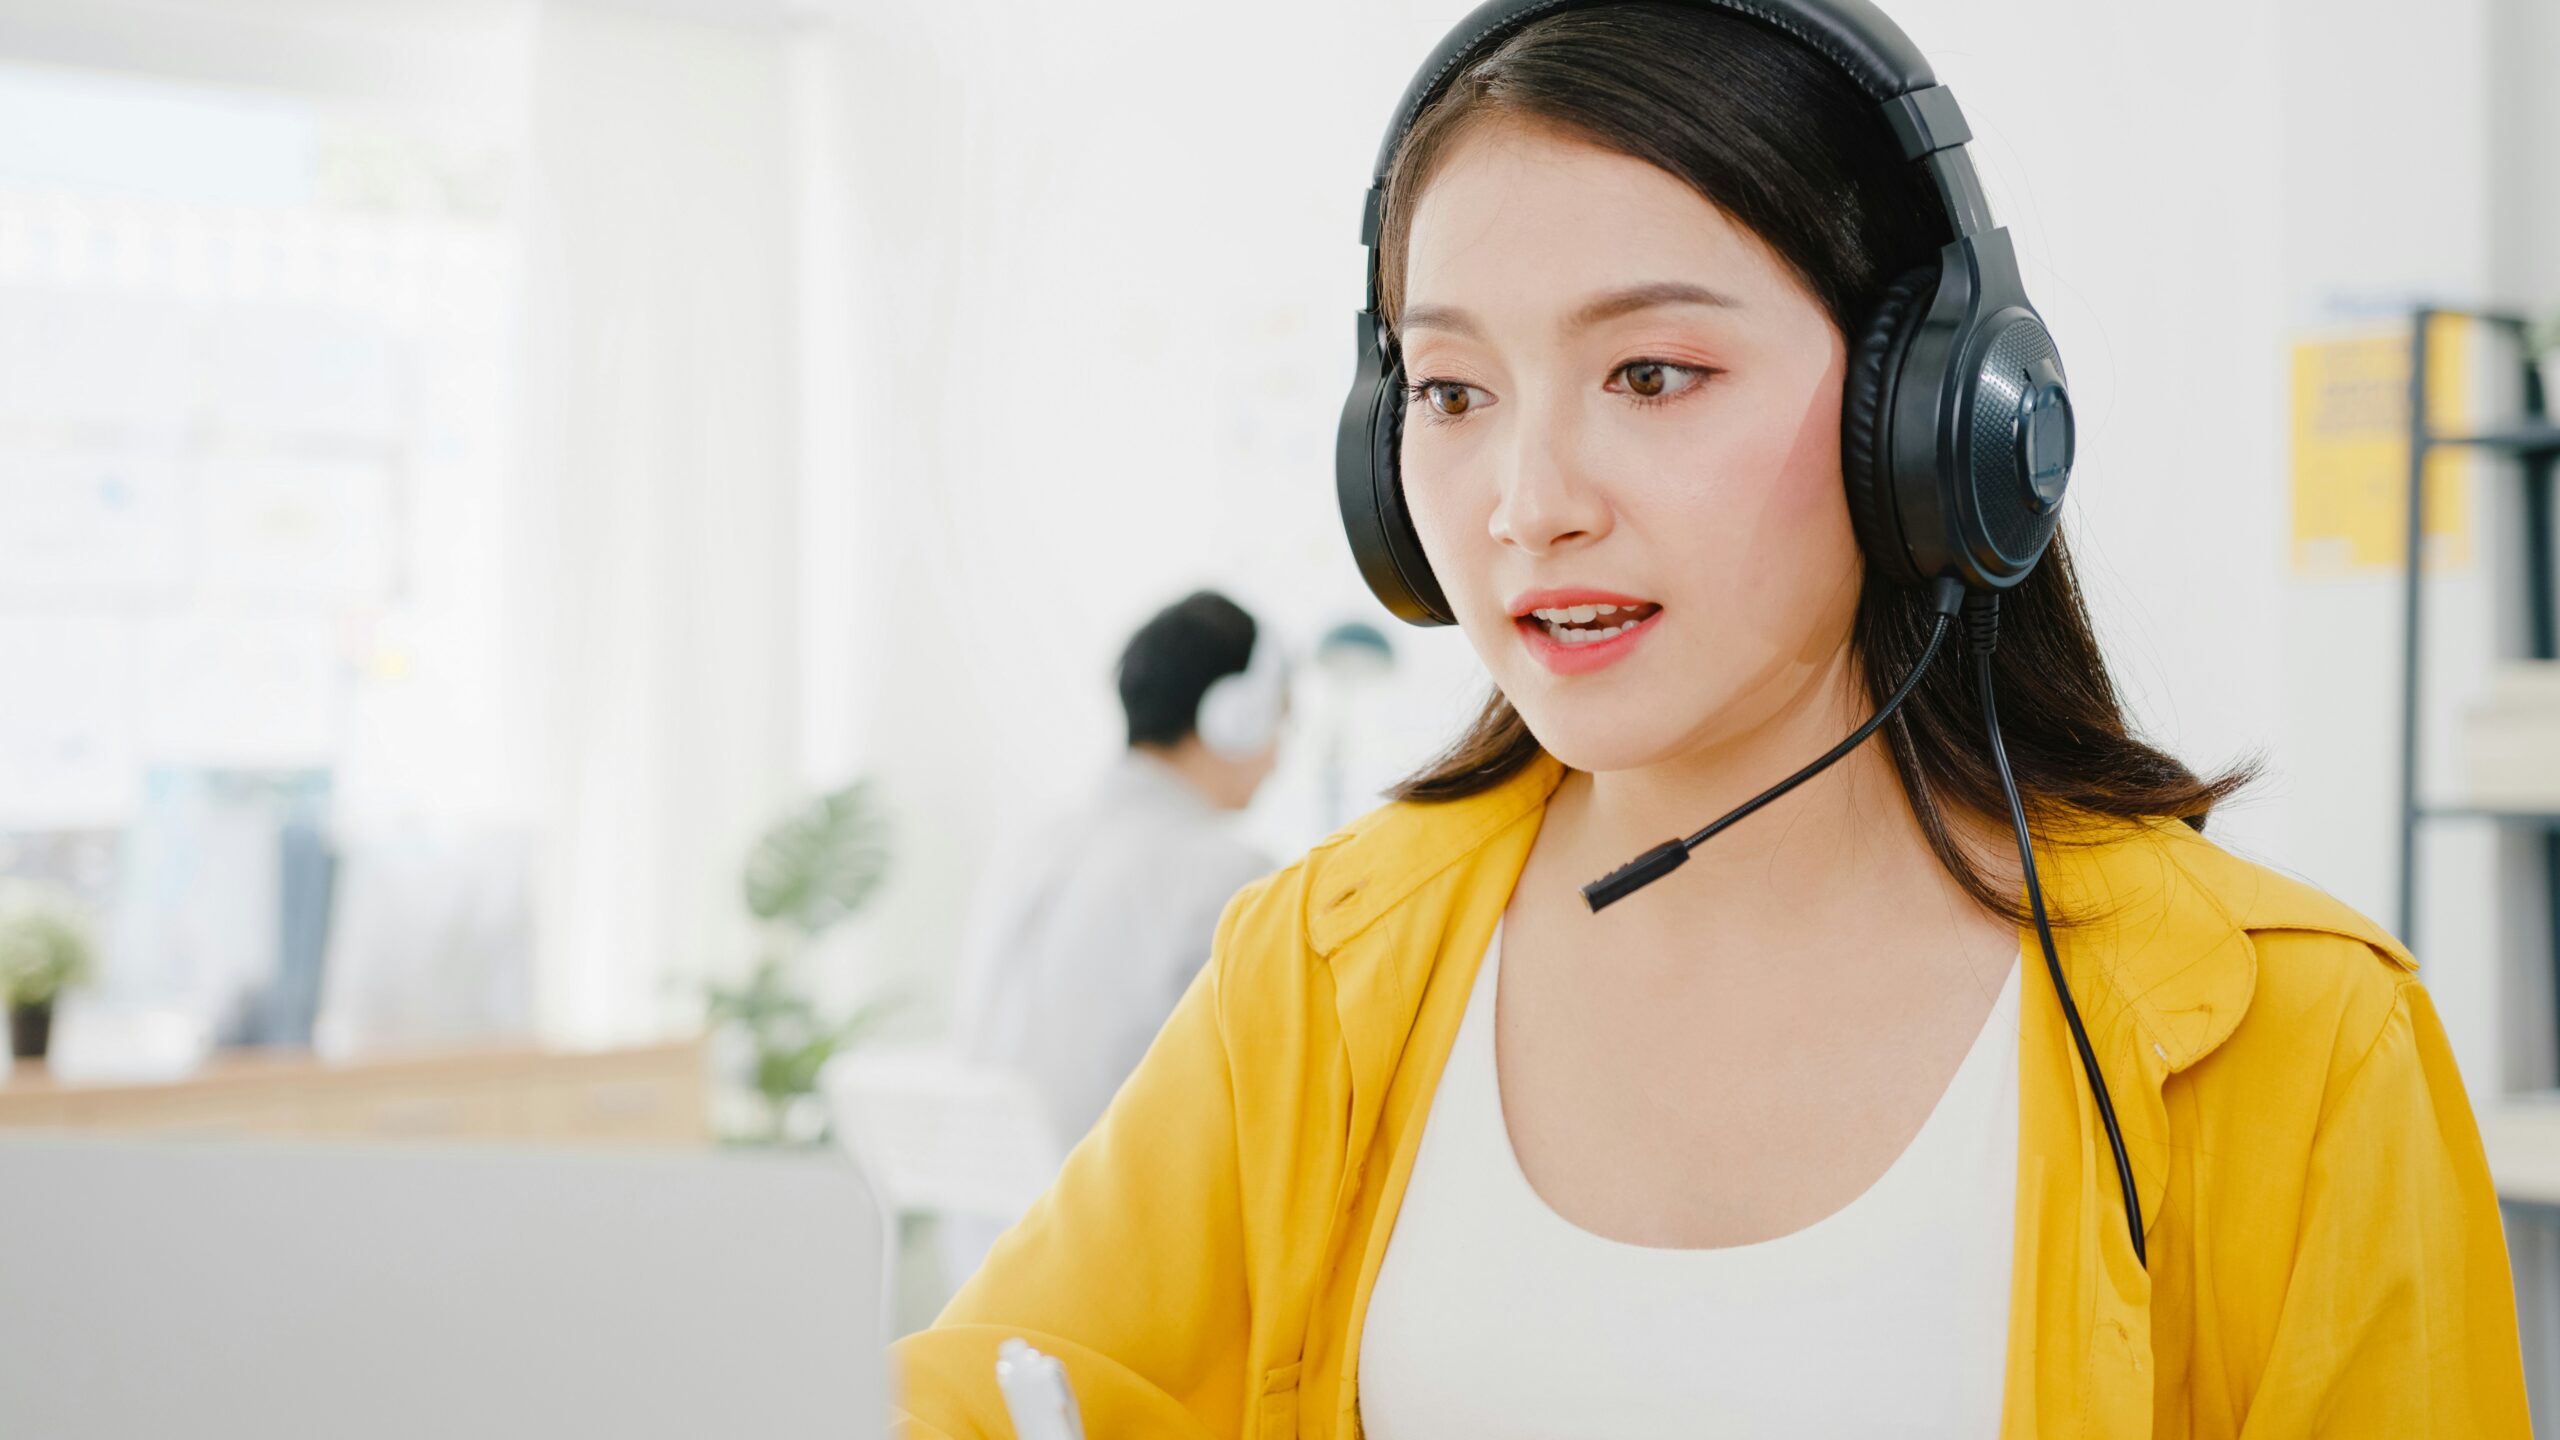 A customer service representative specializing in managed IT, wearing a headset in an office environment.